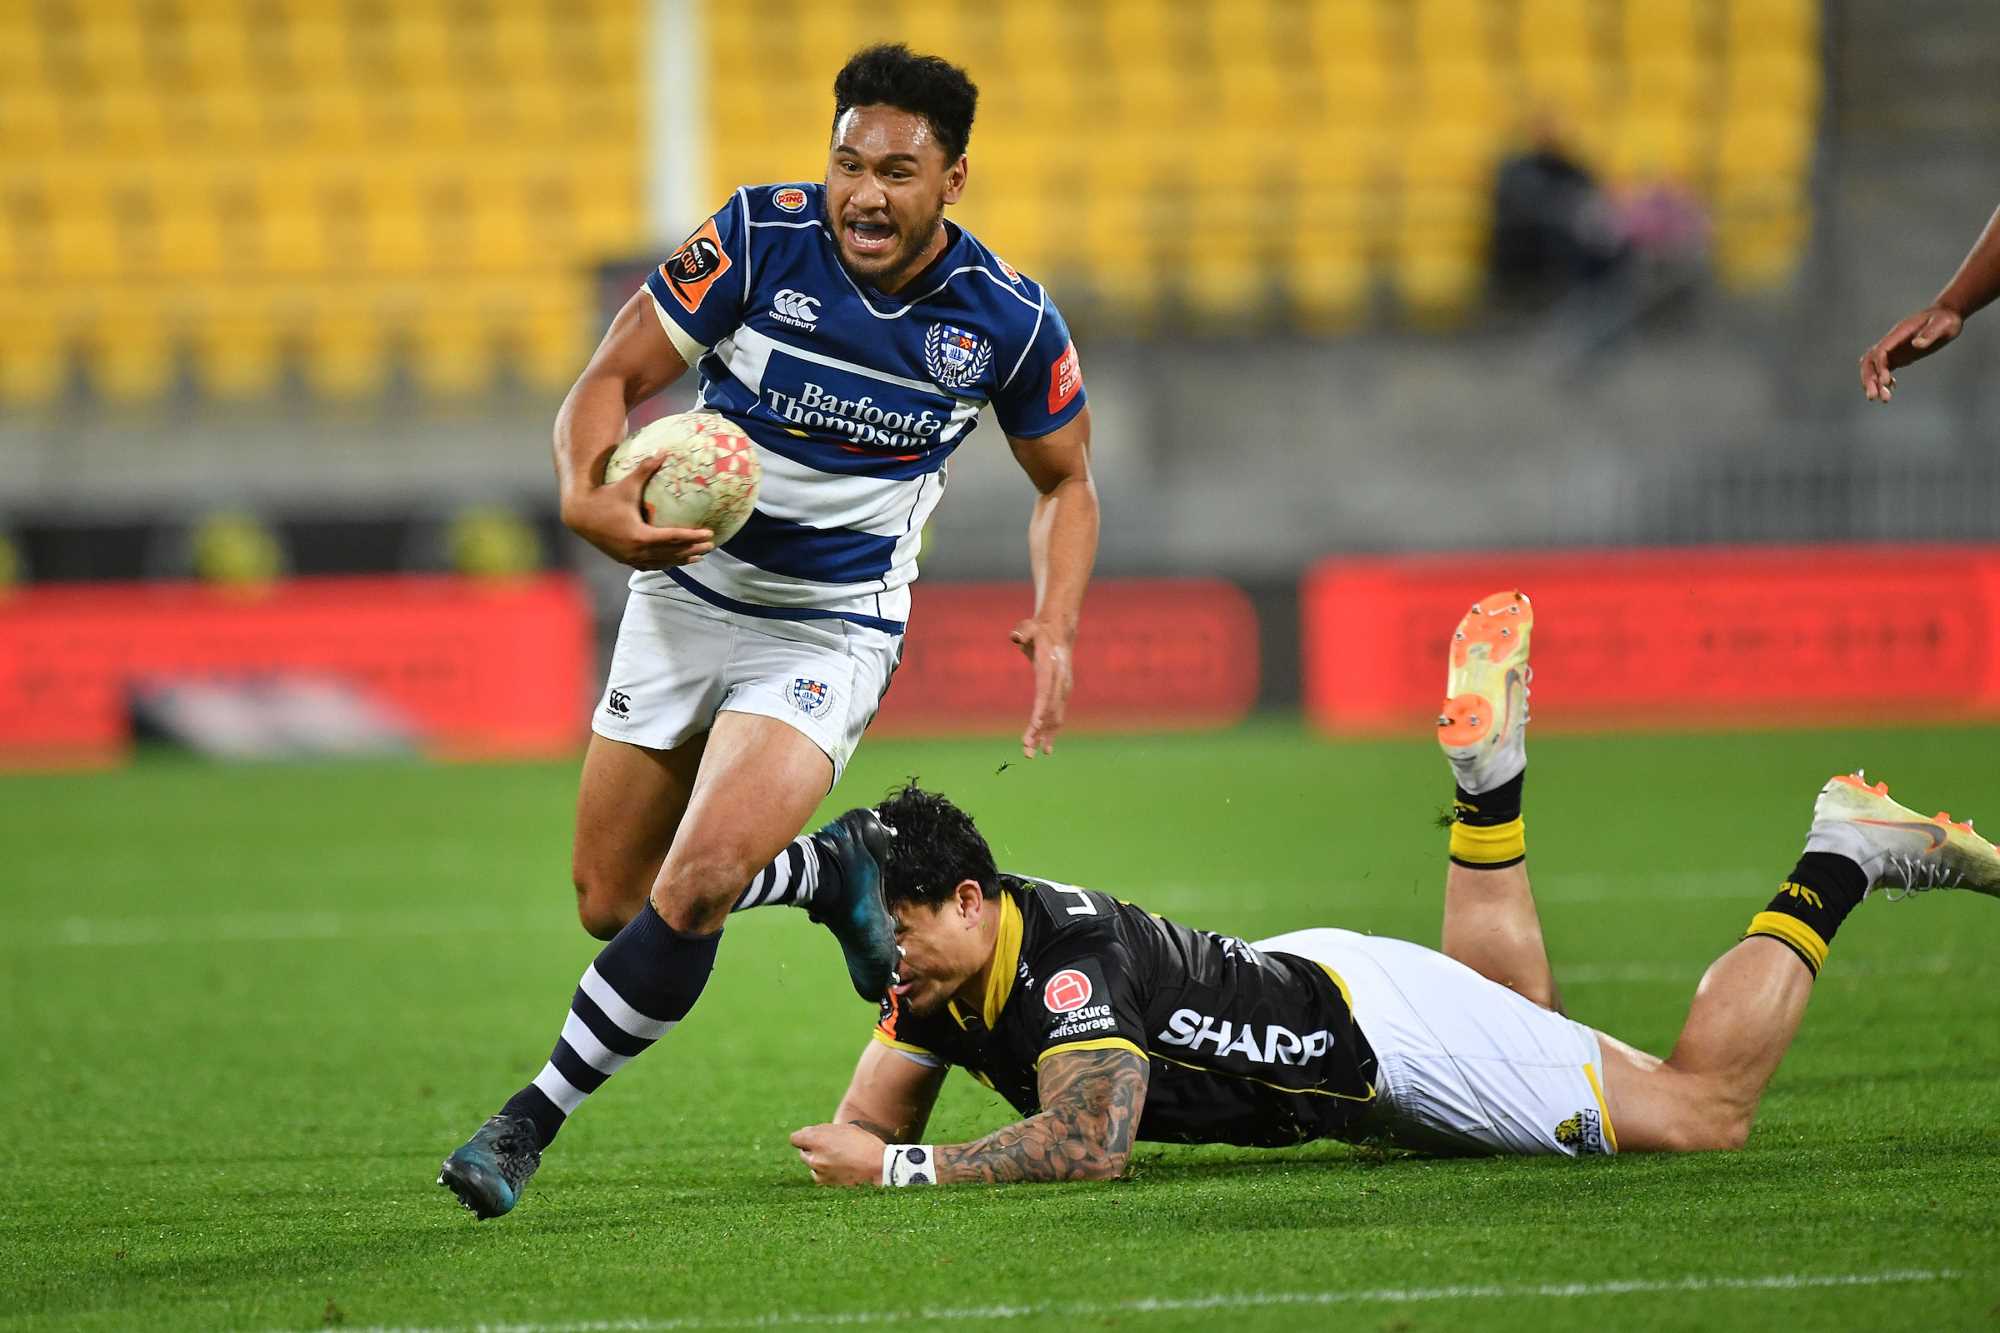 Youthful Auckland travel to the deep South